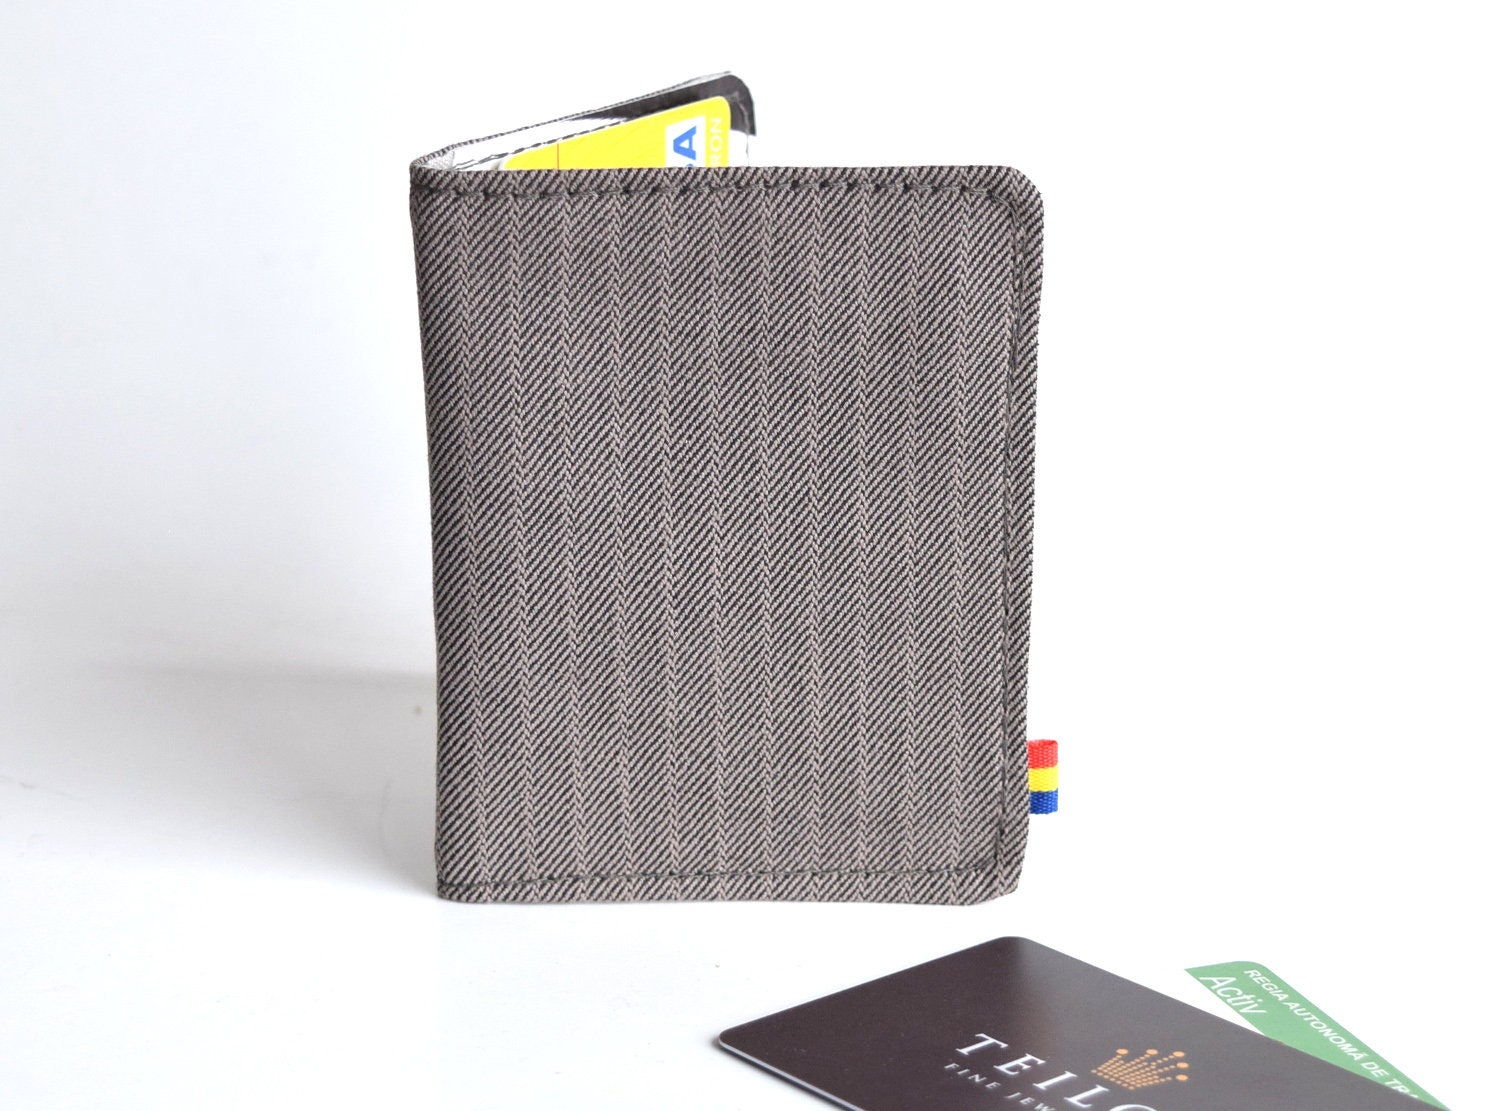 Cards Wallet. Gray Heavy Cotton. Small Vegan Wallet. Slim, Minimalist and Partially upcycled.